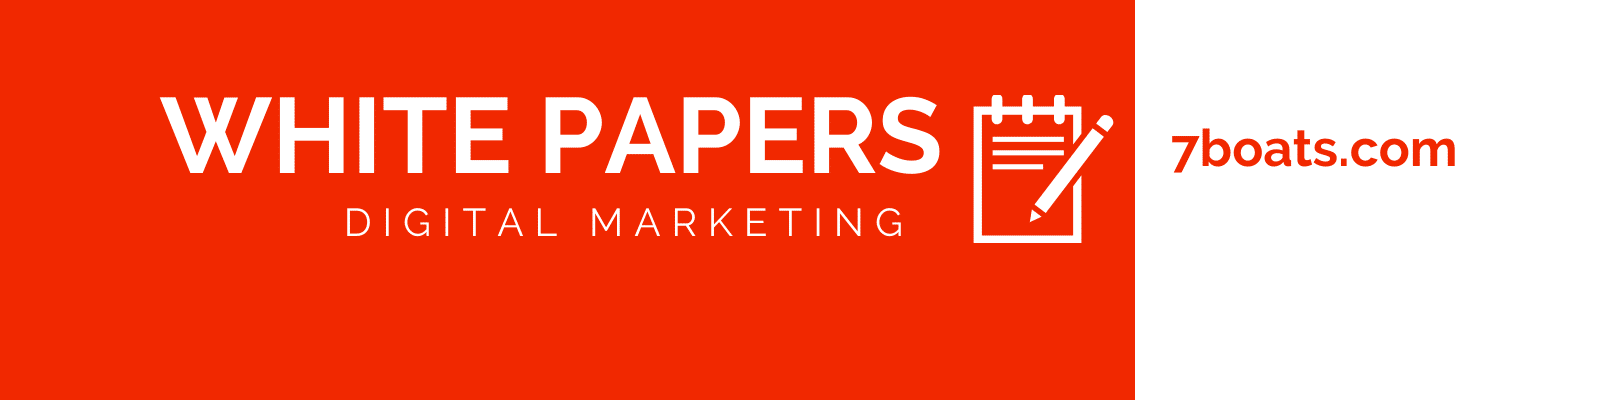 digital marketing white papers by 7boats